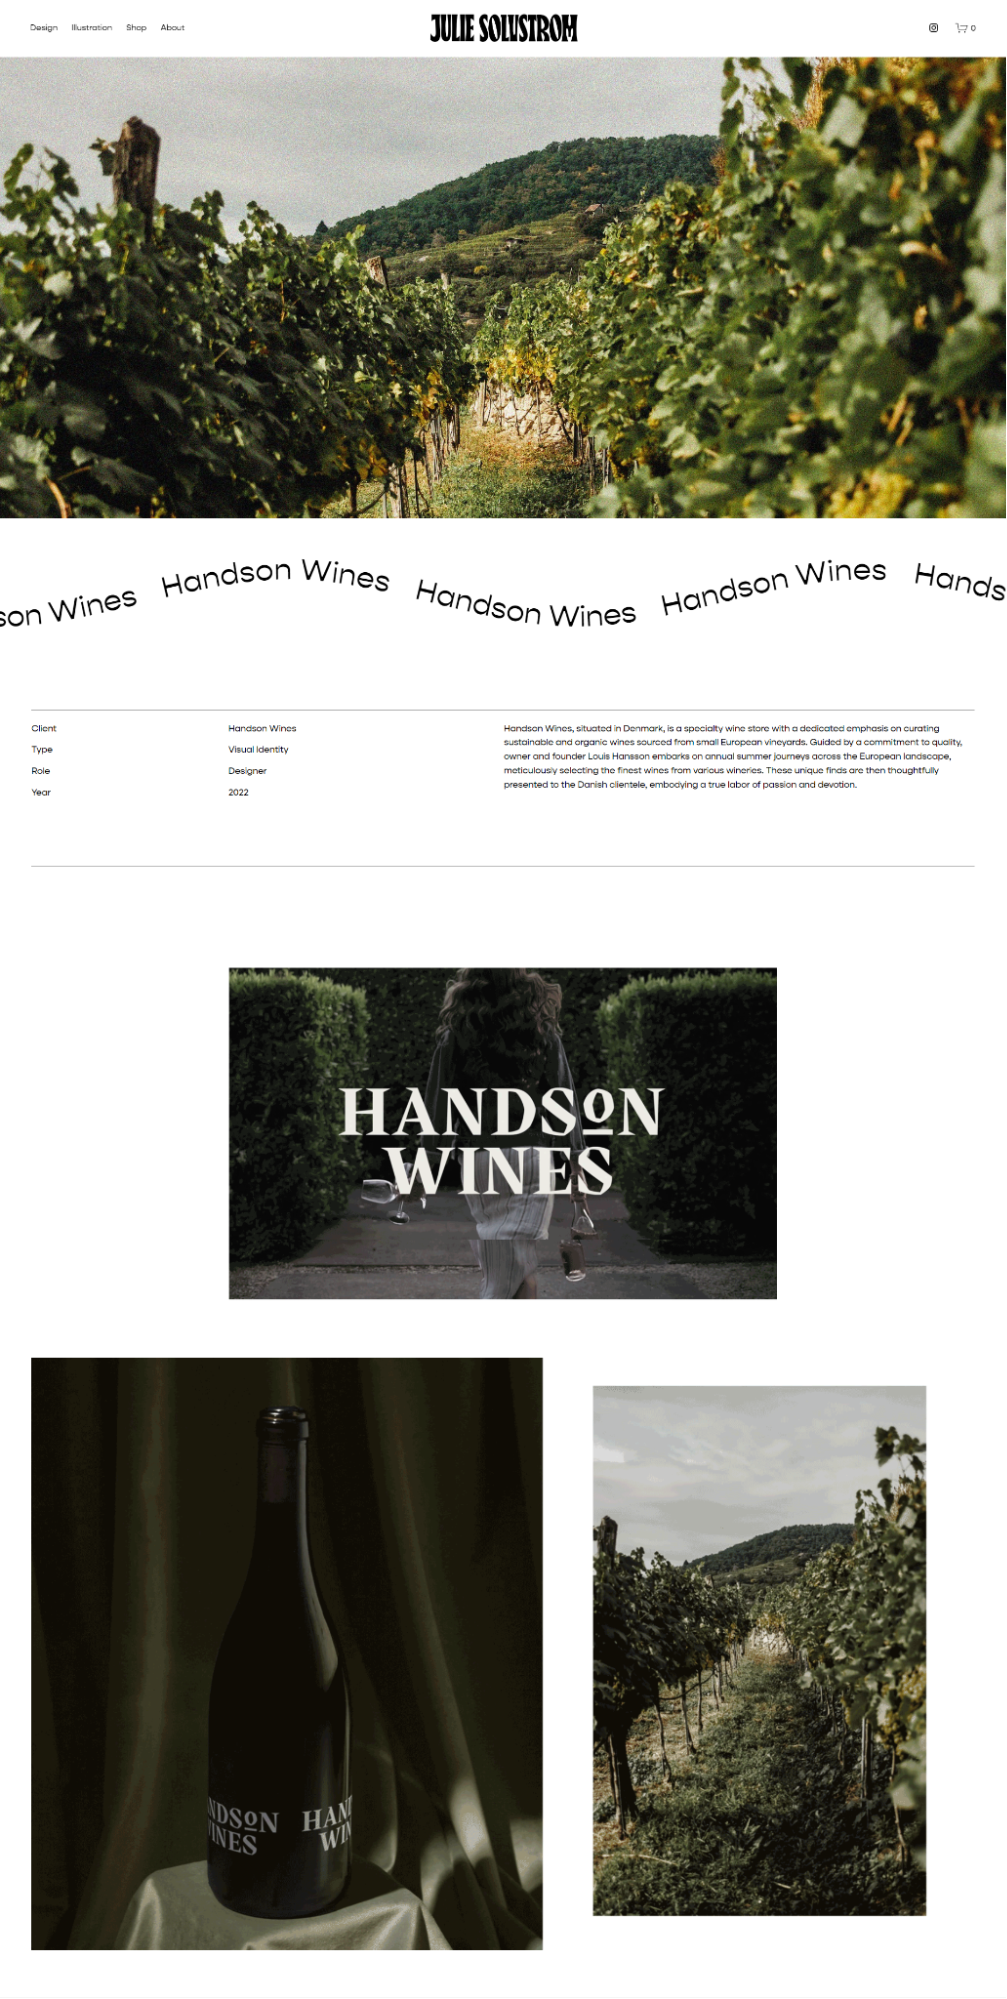 Julie did visual identity work for Handson Wines. This is its case study page.